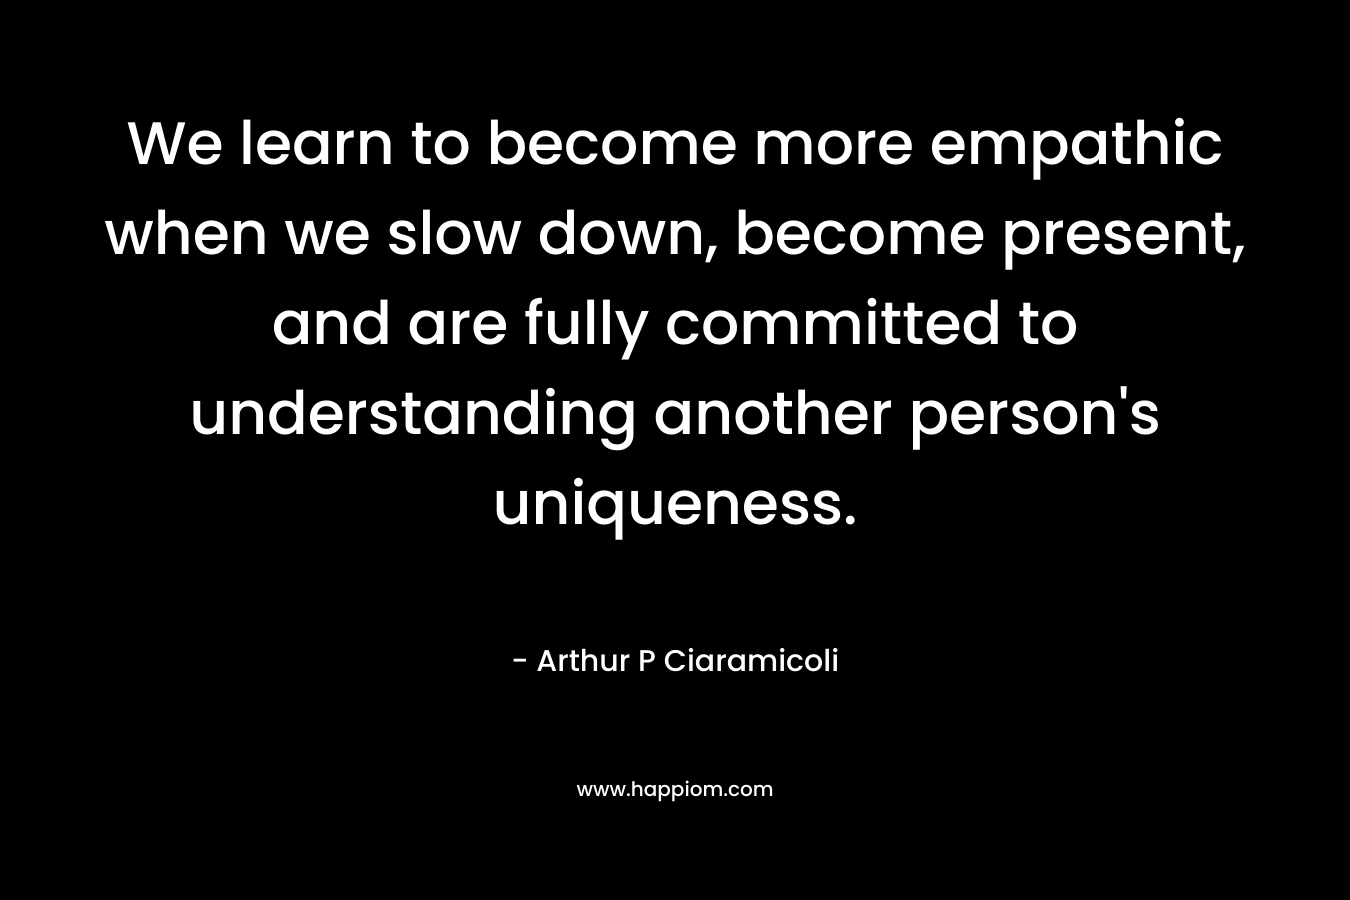 We learn to become more empathic when we slow down, become present, and are fully committed to understanding another person’s uniqueness. – Arthur P Ciaramicoli